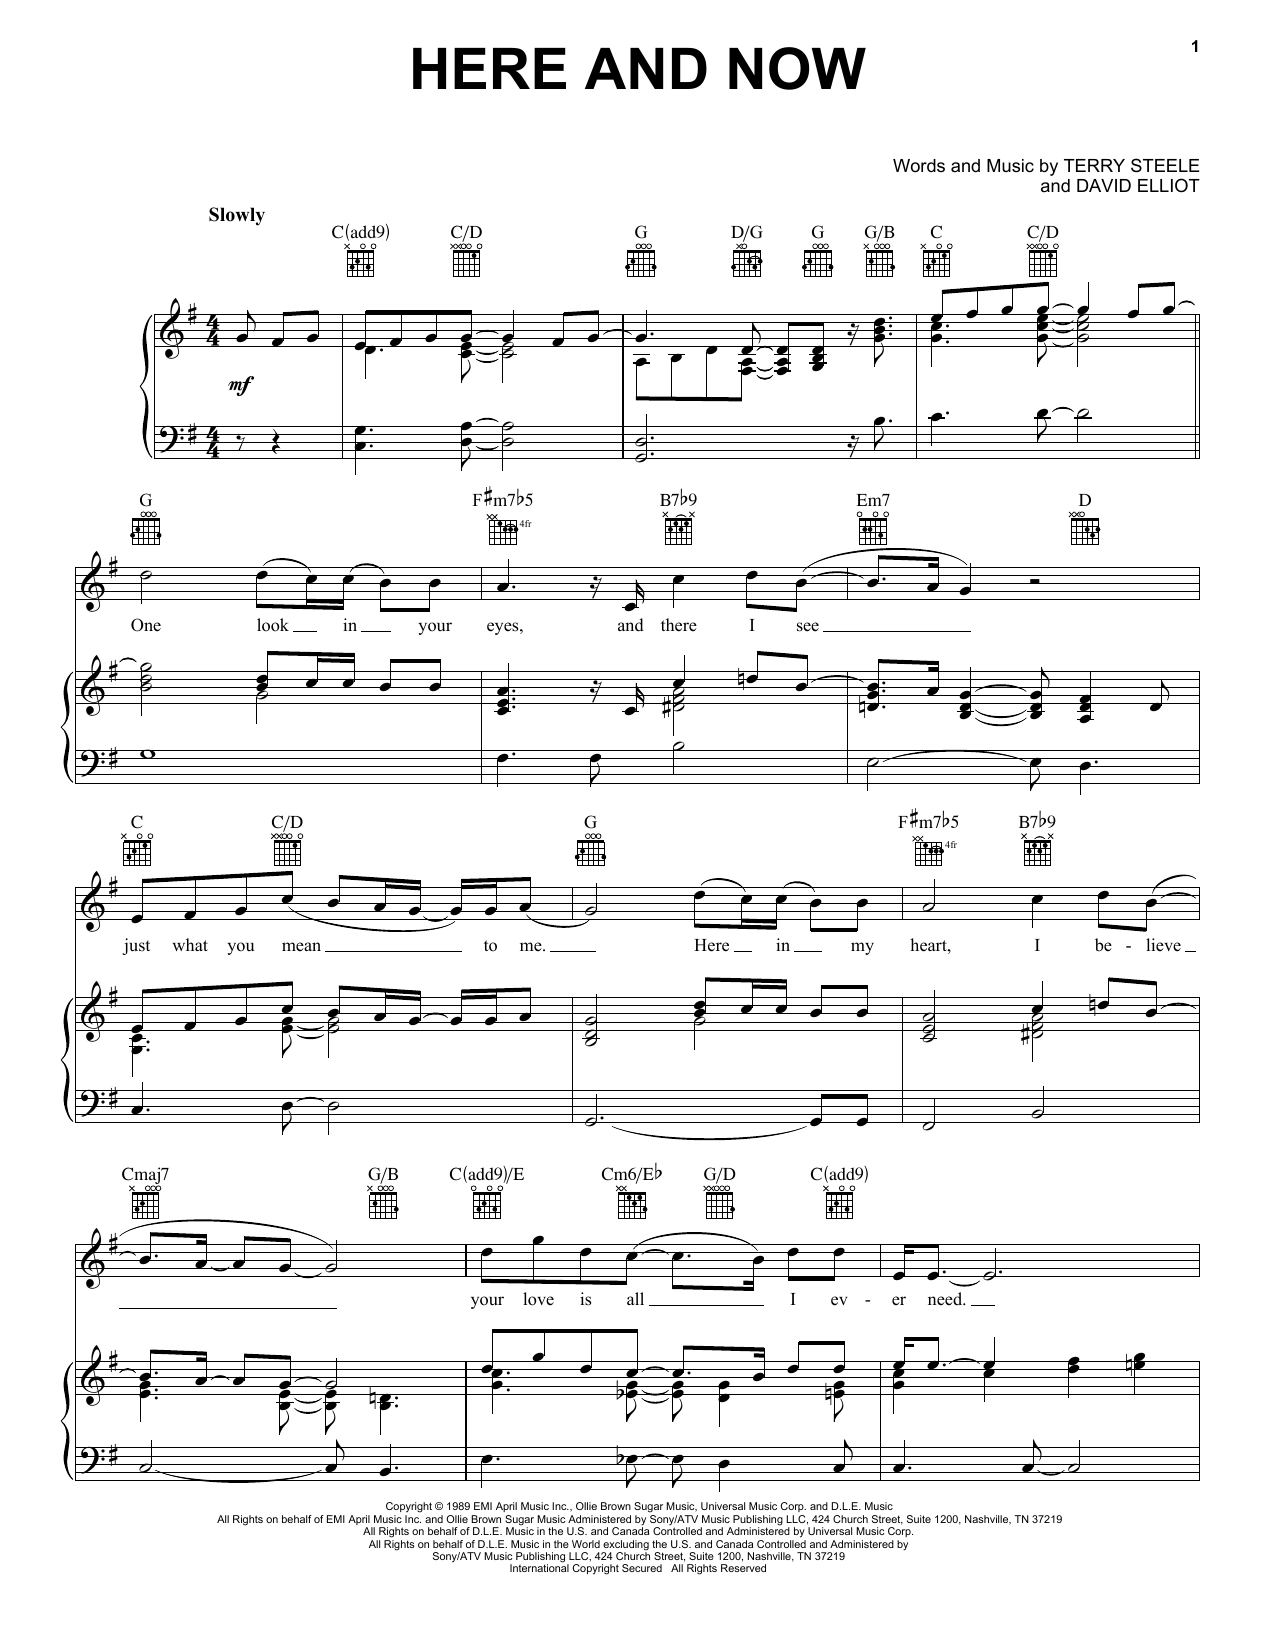 Luther Vandross Here And Now sheet music notes and chords. Download Printable PDF.